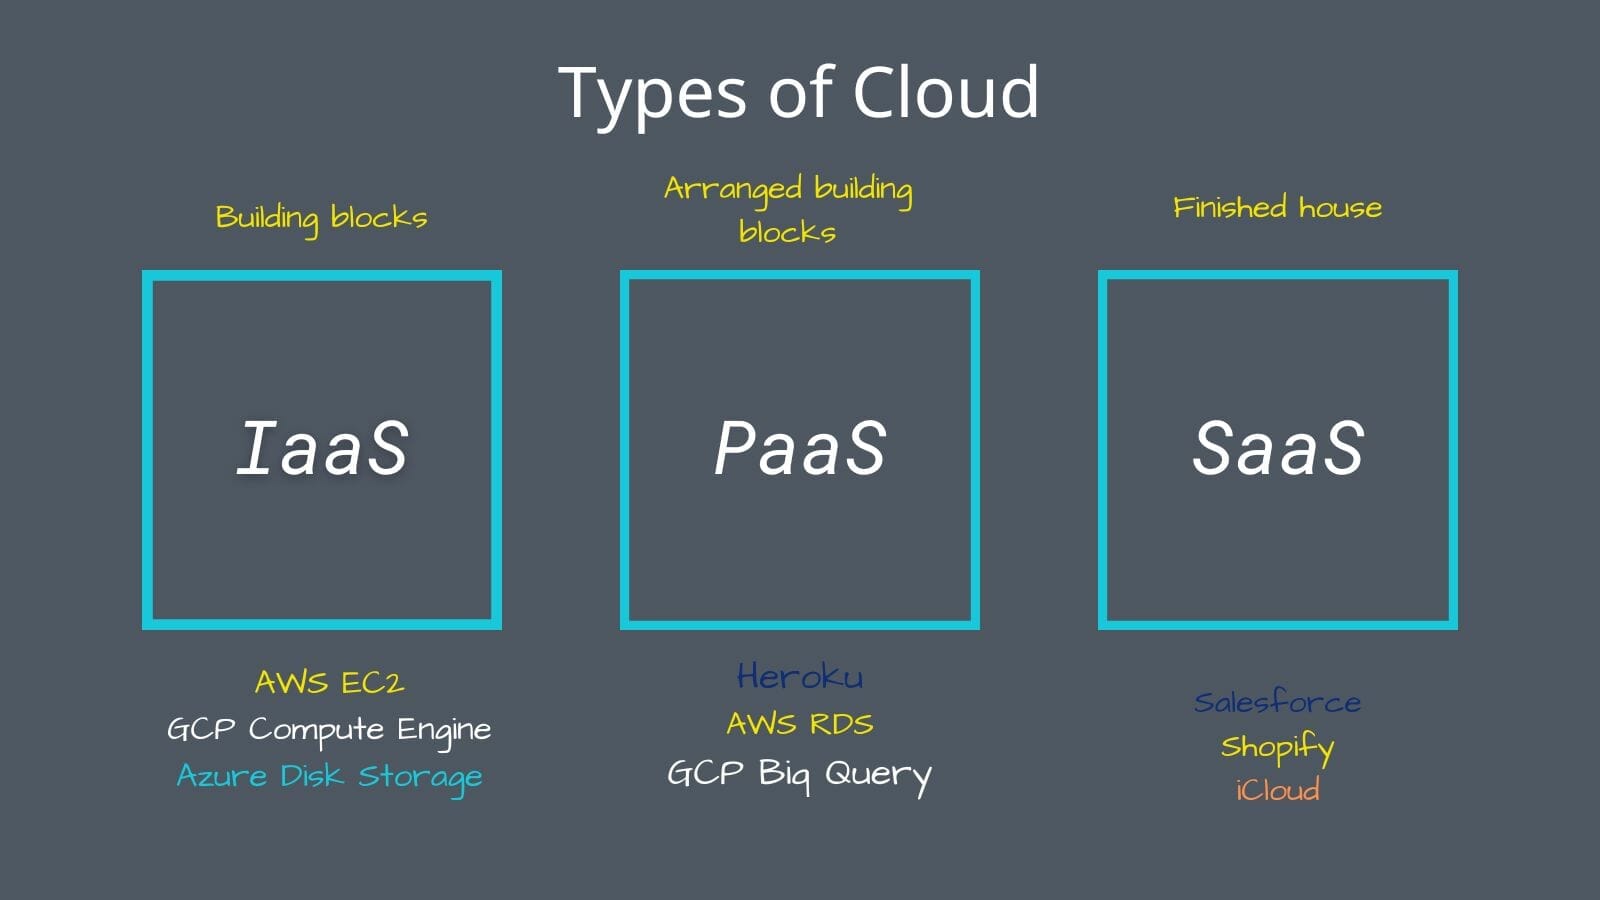 graph illustrating the 3 different types of cloud, IaaS, PaaS, and SaaS